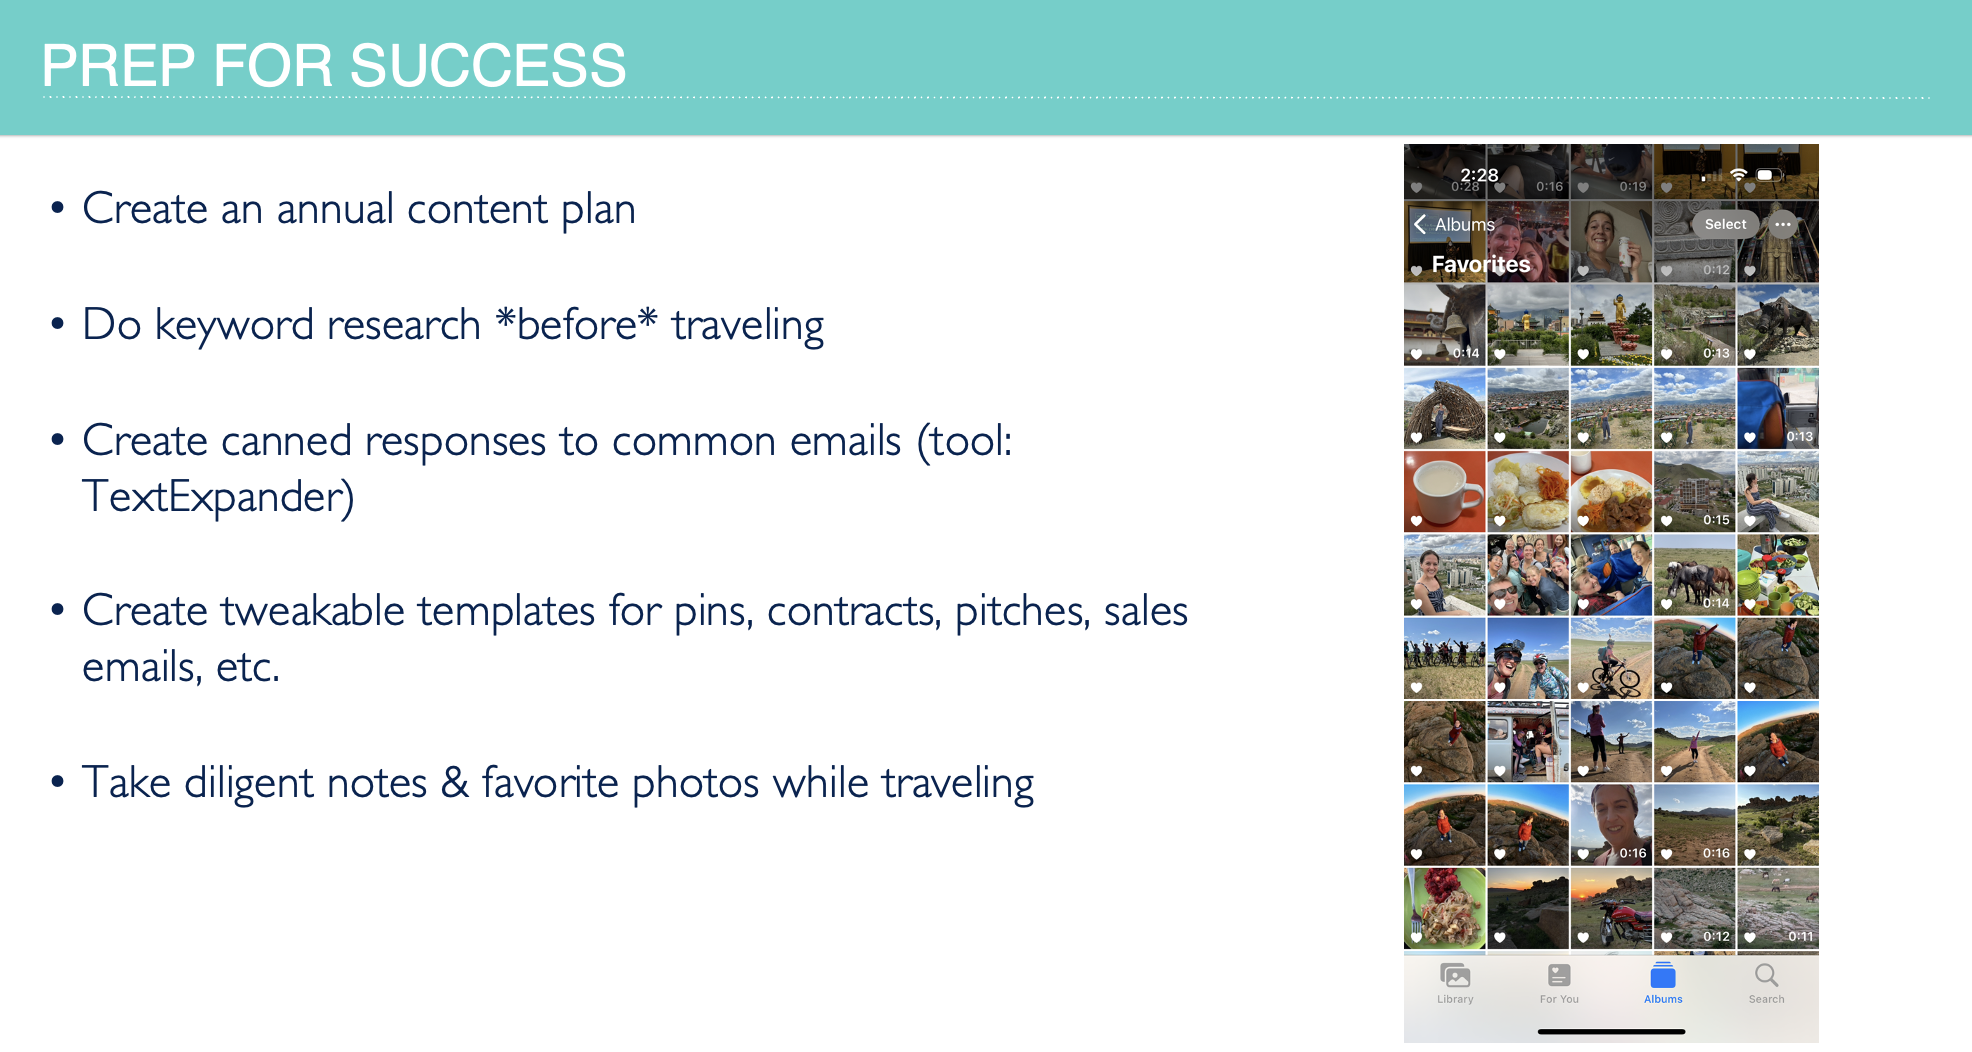 Screenshot with 5 ways to prep for success from Jessie Festa's presentation on the How to Avoid Travel Blogging Burnout: Blogxiety Webinar